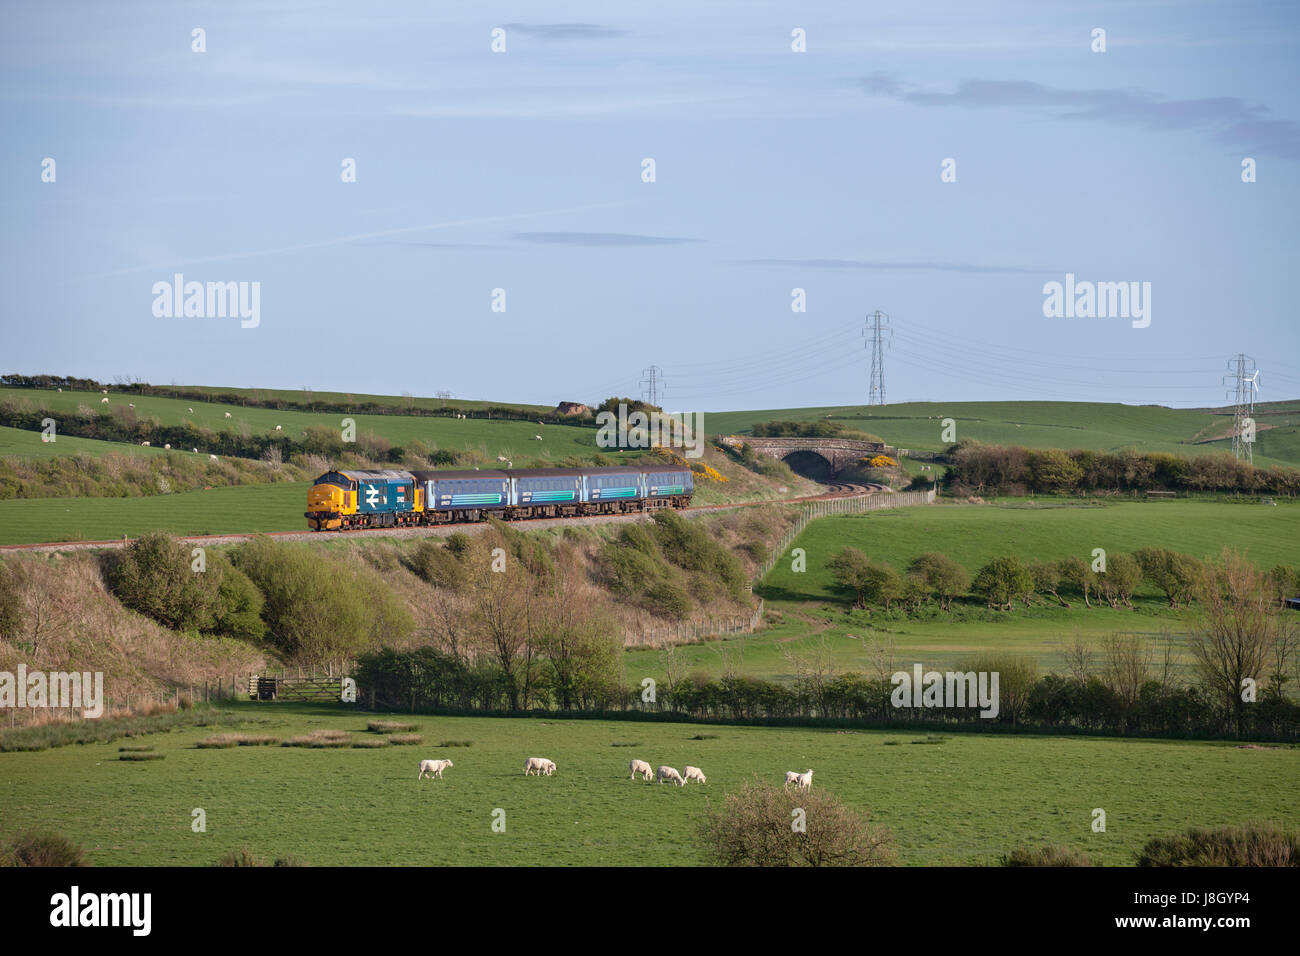 22/04/2017 Annaside (south of Bootle) Direct rail Services Class 37 locomotive hauling Northern Rail Barrow In Furness - Carlisle train Stock Photo